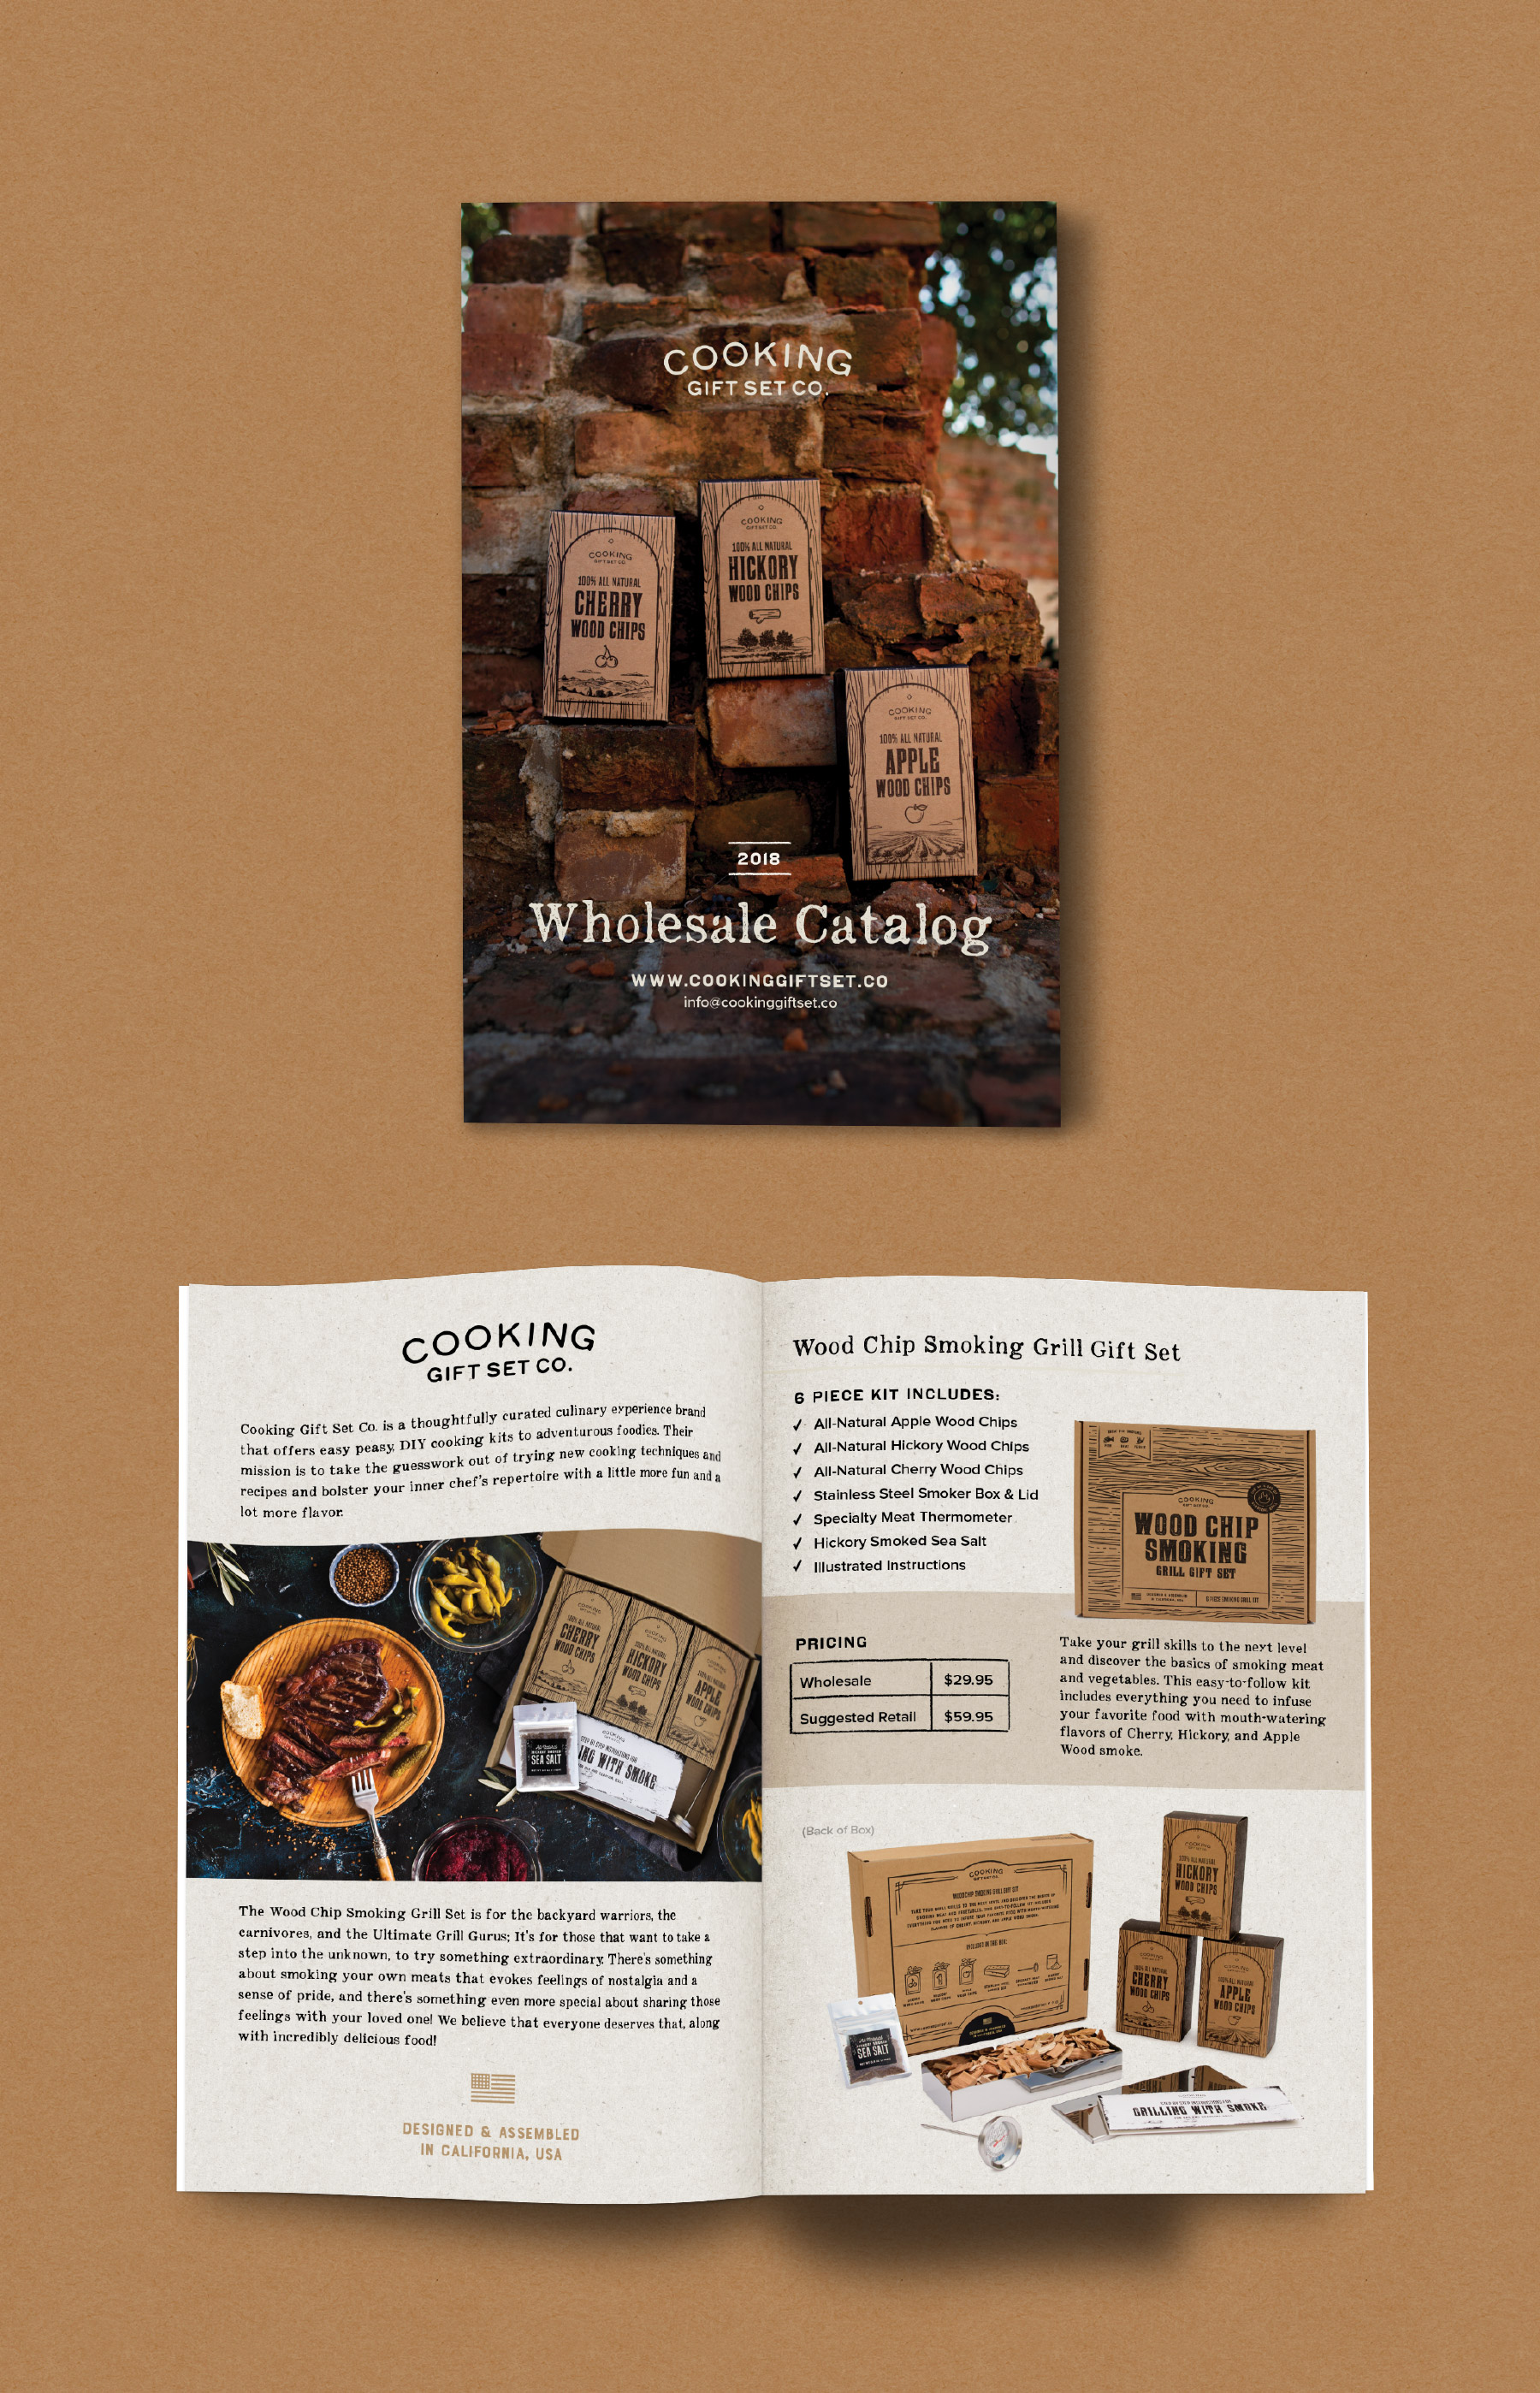 wholesale catalog cover, about page, and pricing information